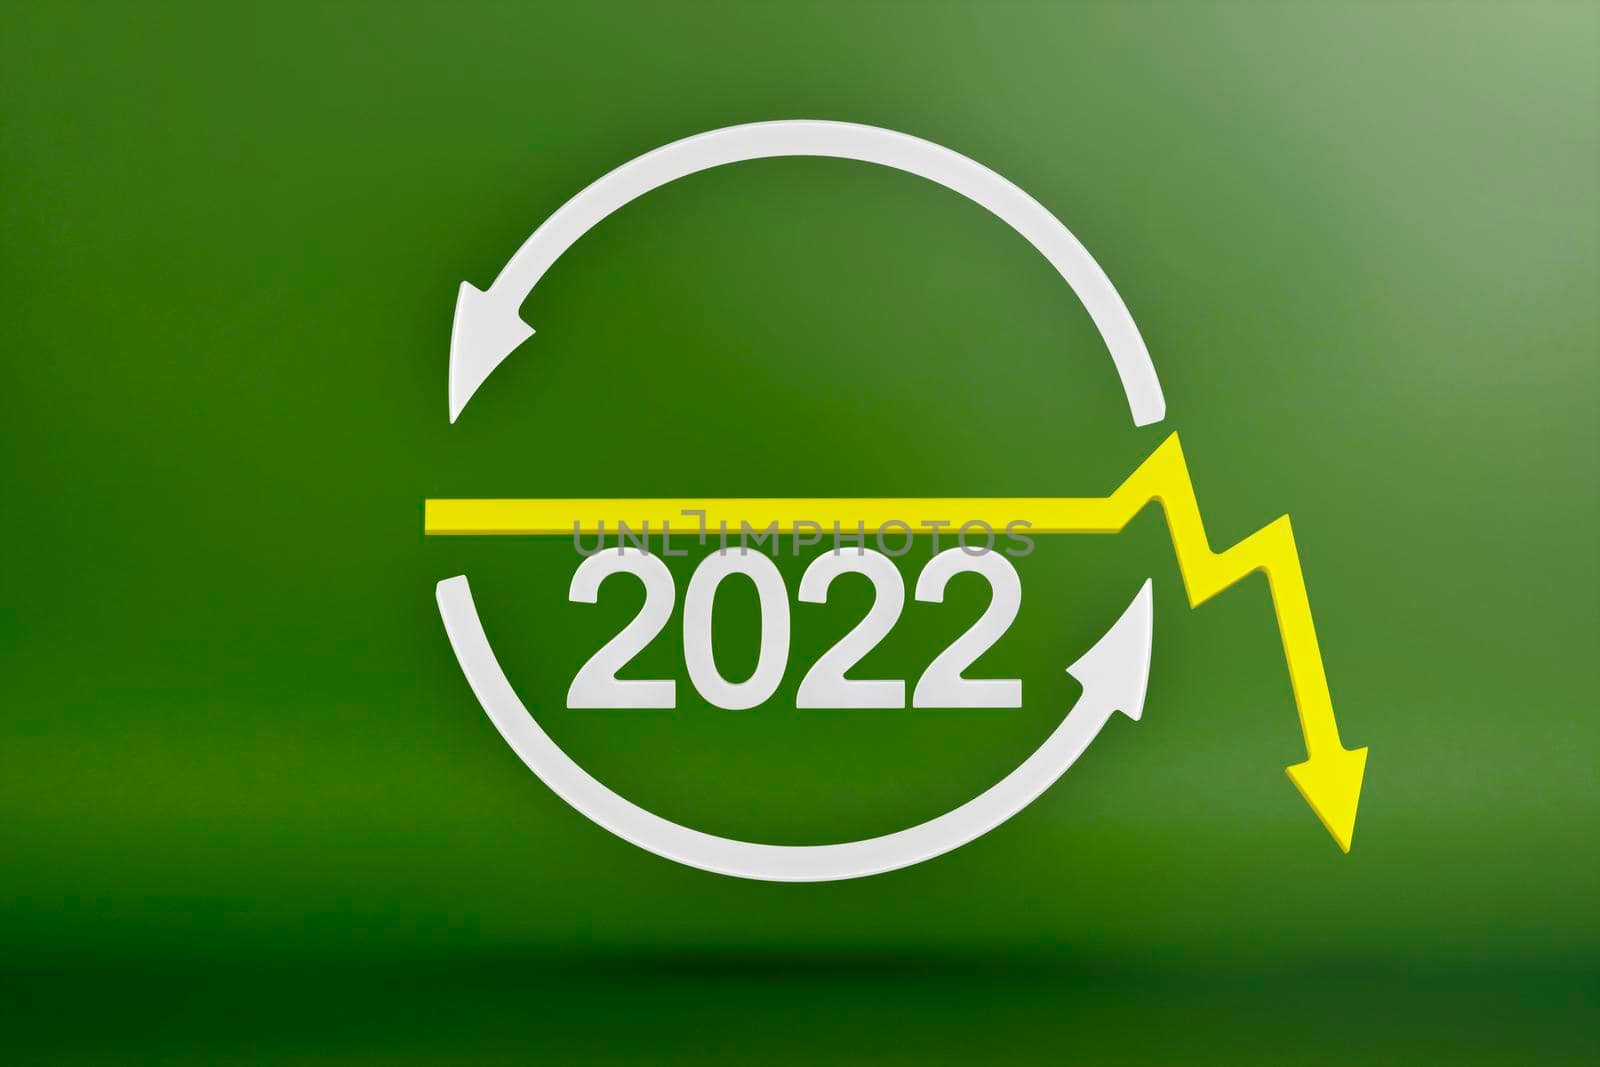 Ecology, recycling symbol 2022, white arrows form a circle. 3D image on a green background. Green products, green renewable energy, graph pointing up and down.